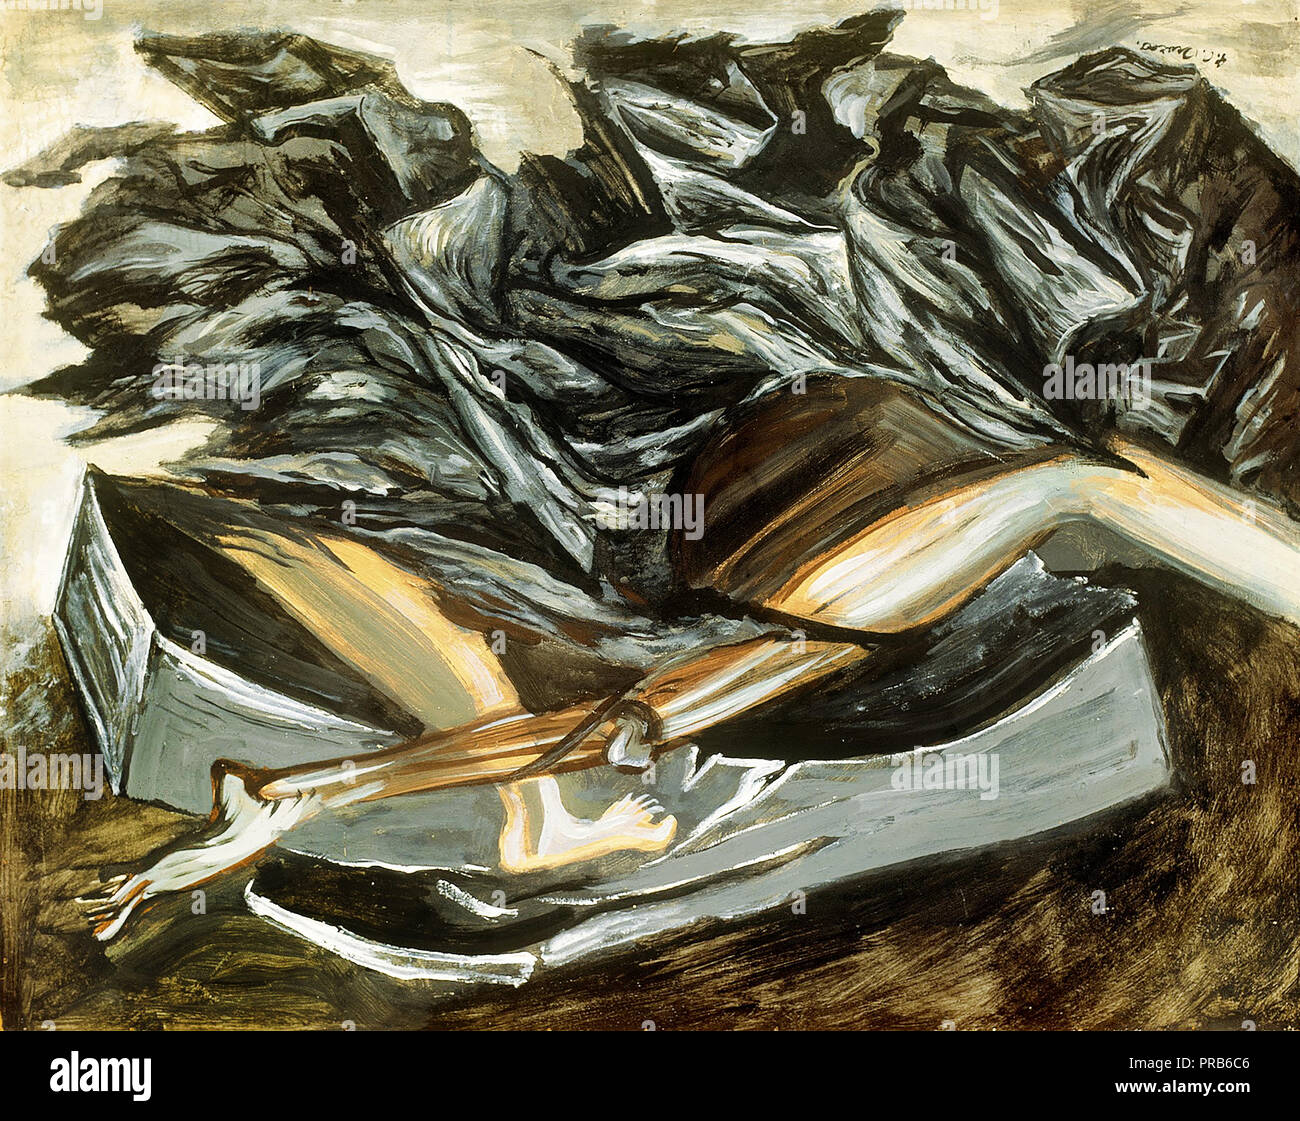 Jose Clemente Orozco, Mayor State of Buffoons 1946 Oil on canvas, Museum of Latin American Art. Stock Photo